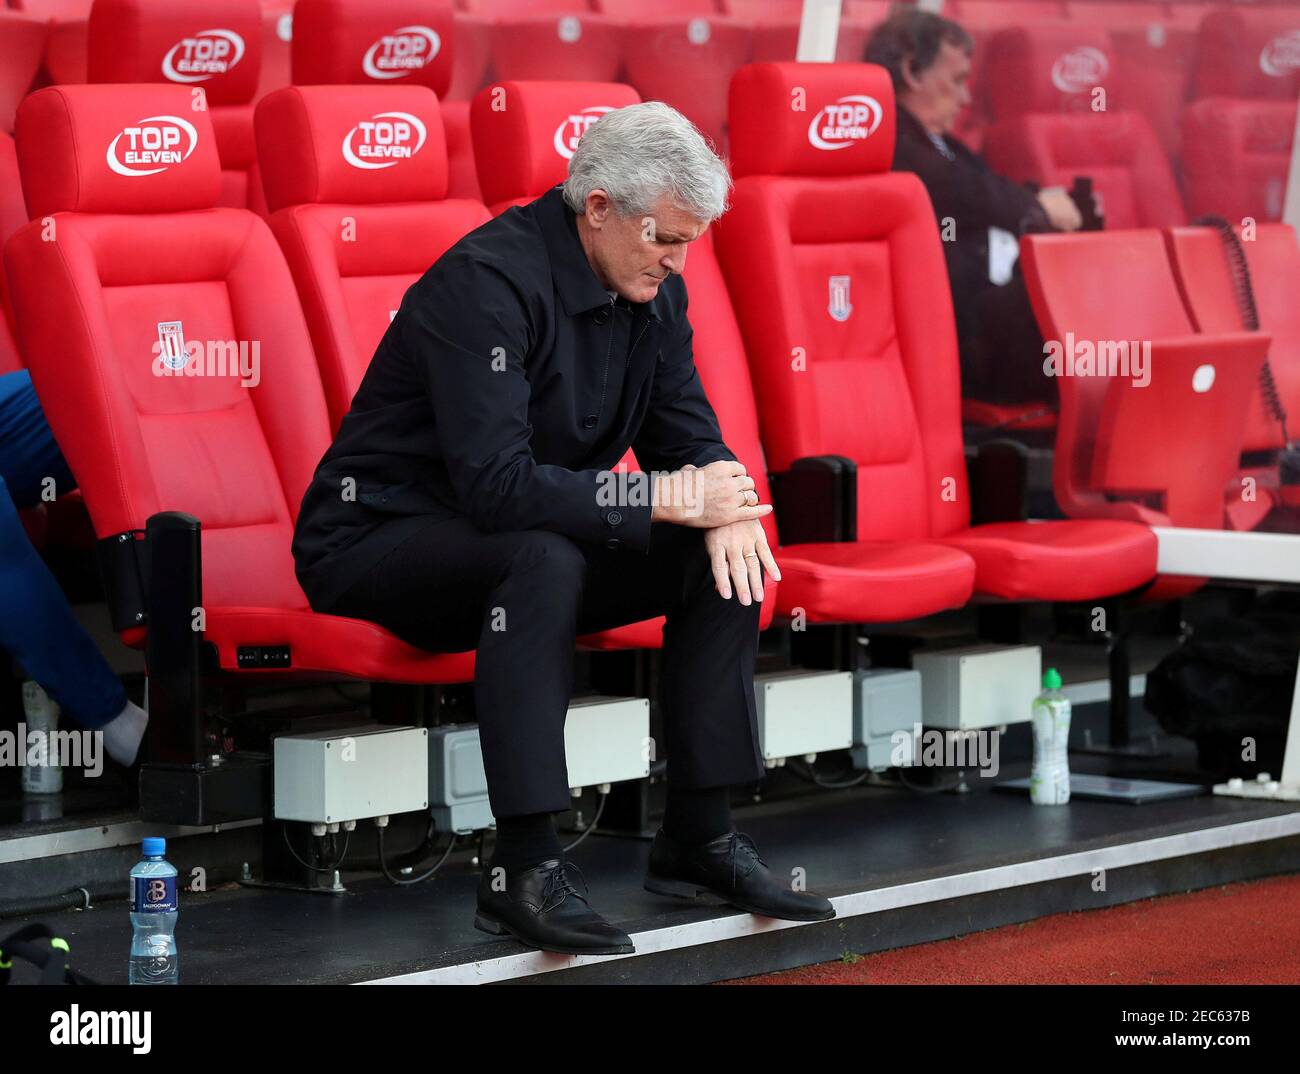 FILE PHOTO: Soccer Football - Premier League - Stoke City vs West Bromwich Albion - bet365 Stadium, Stoke-on-Trent, Britain - December 23, 2017   Stoke City manager Mark Hughes before the match    REUTERS/Scott Heppell    EDITORIAL USE ONLY. No use with unauthorized audio, video, data, fixture lists, club/league logos or 'live' services. Online in-match use limited to 75 images, no video emulation. No use in betting, games or single club/league/player publications.  Please contact your account representative for further details. Stock Photo